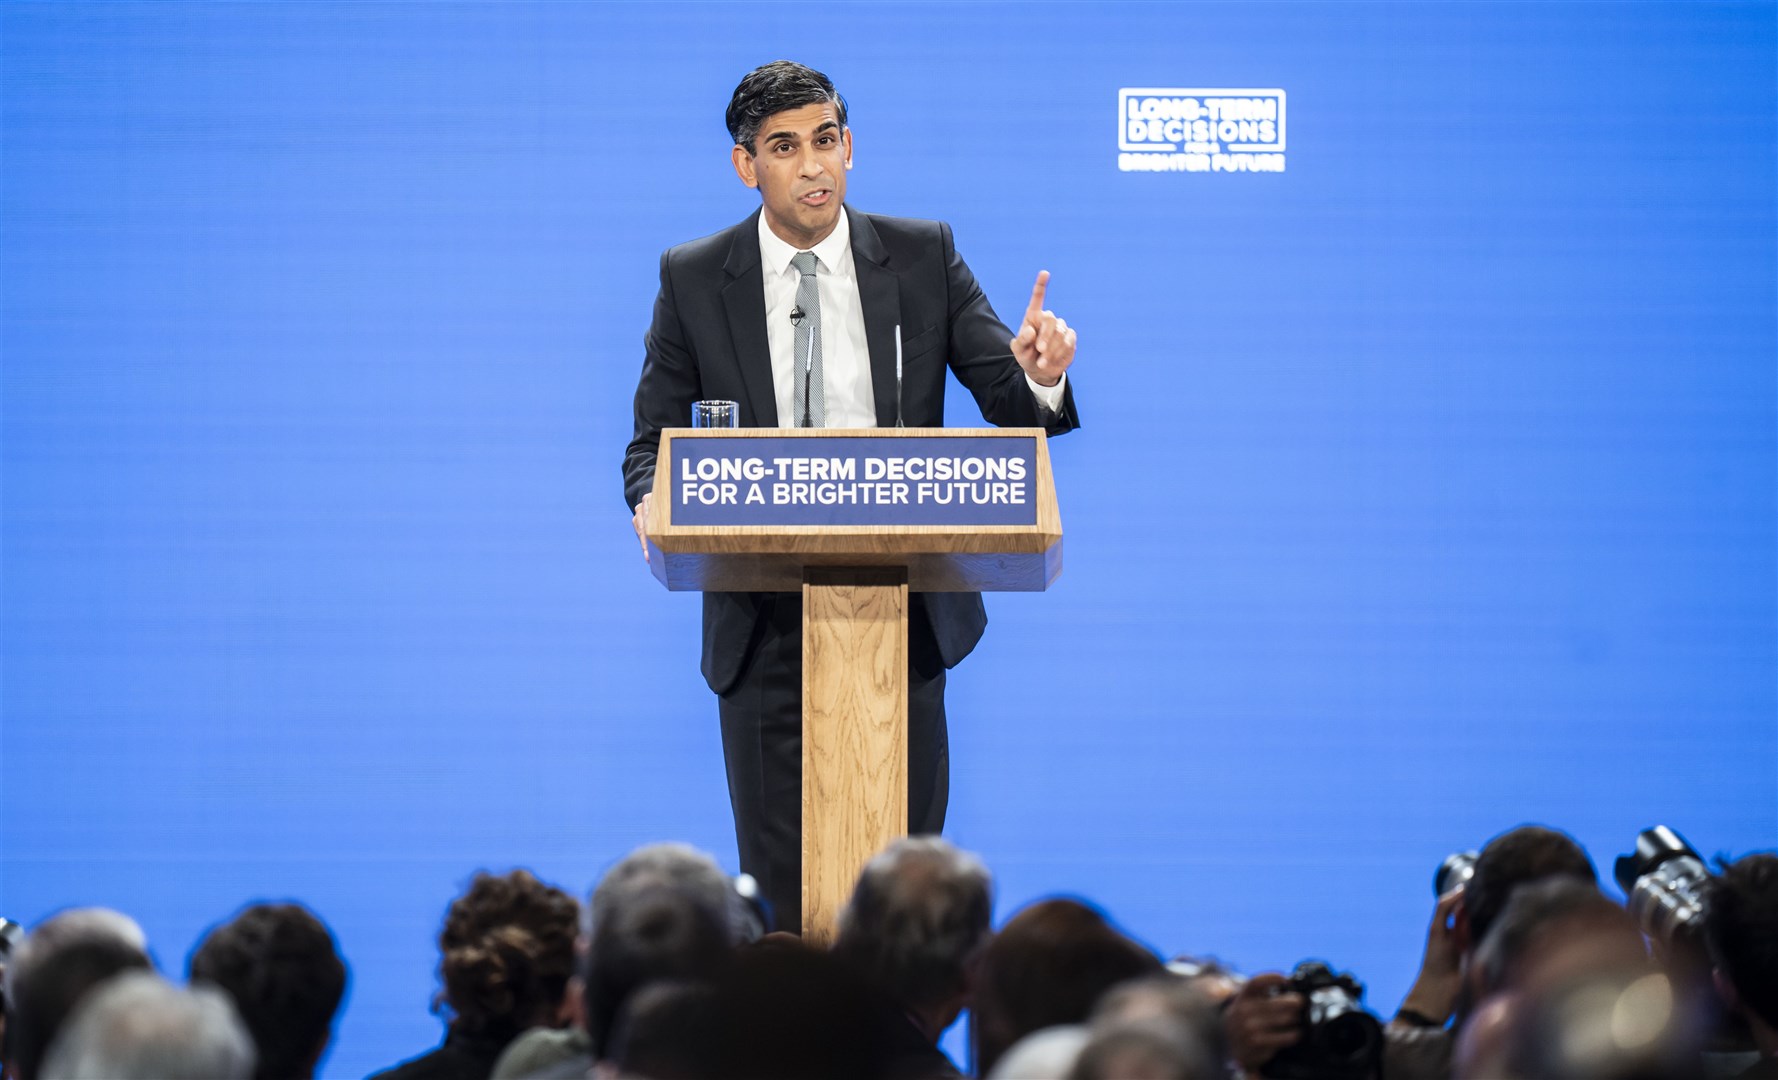 Prime Minister Rishi Sunak pitched himself as a changemaker at the Tory conference (Danny Lawson/PA)